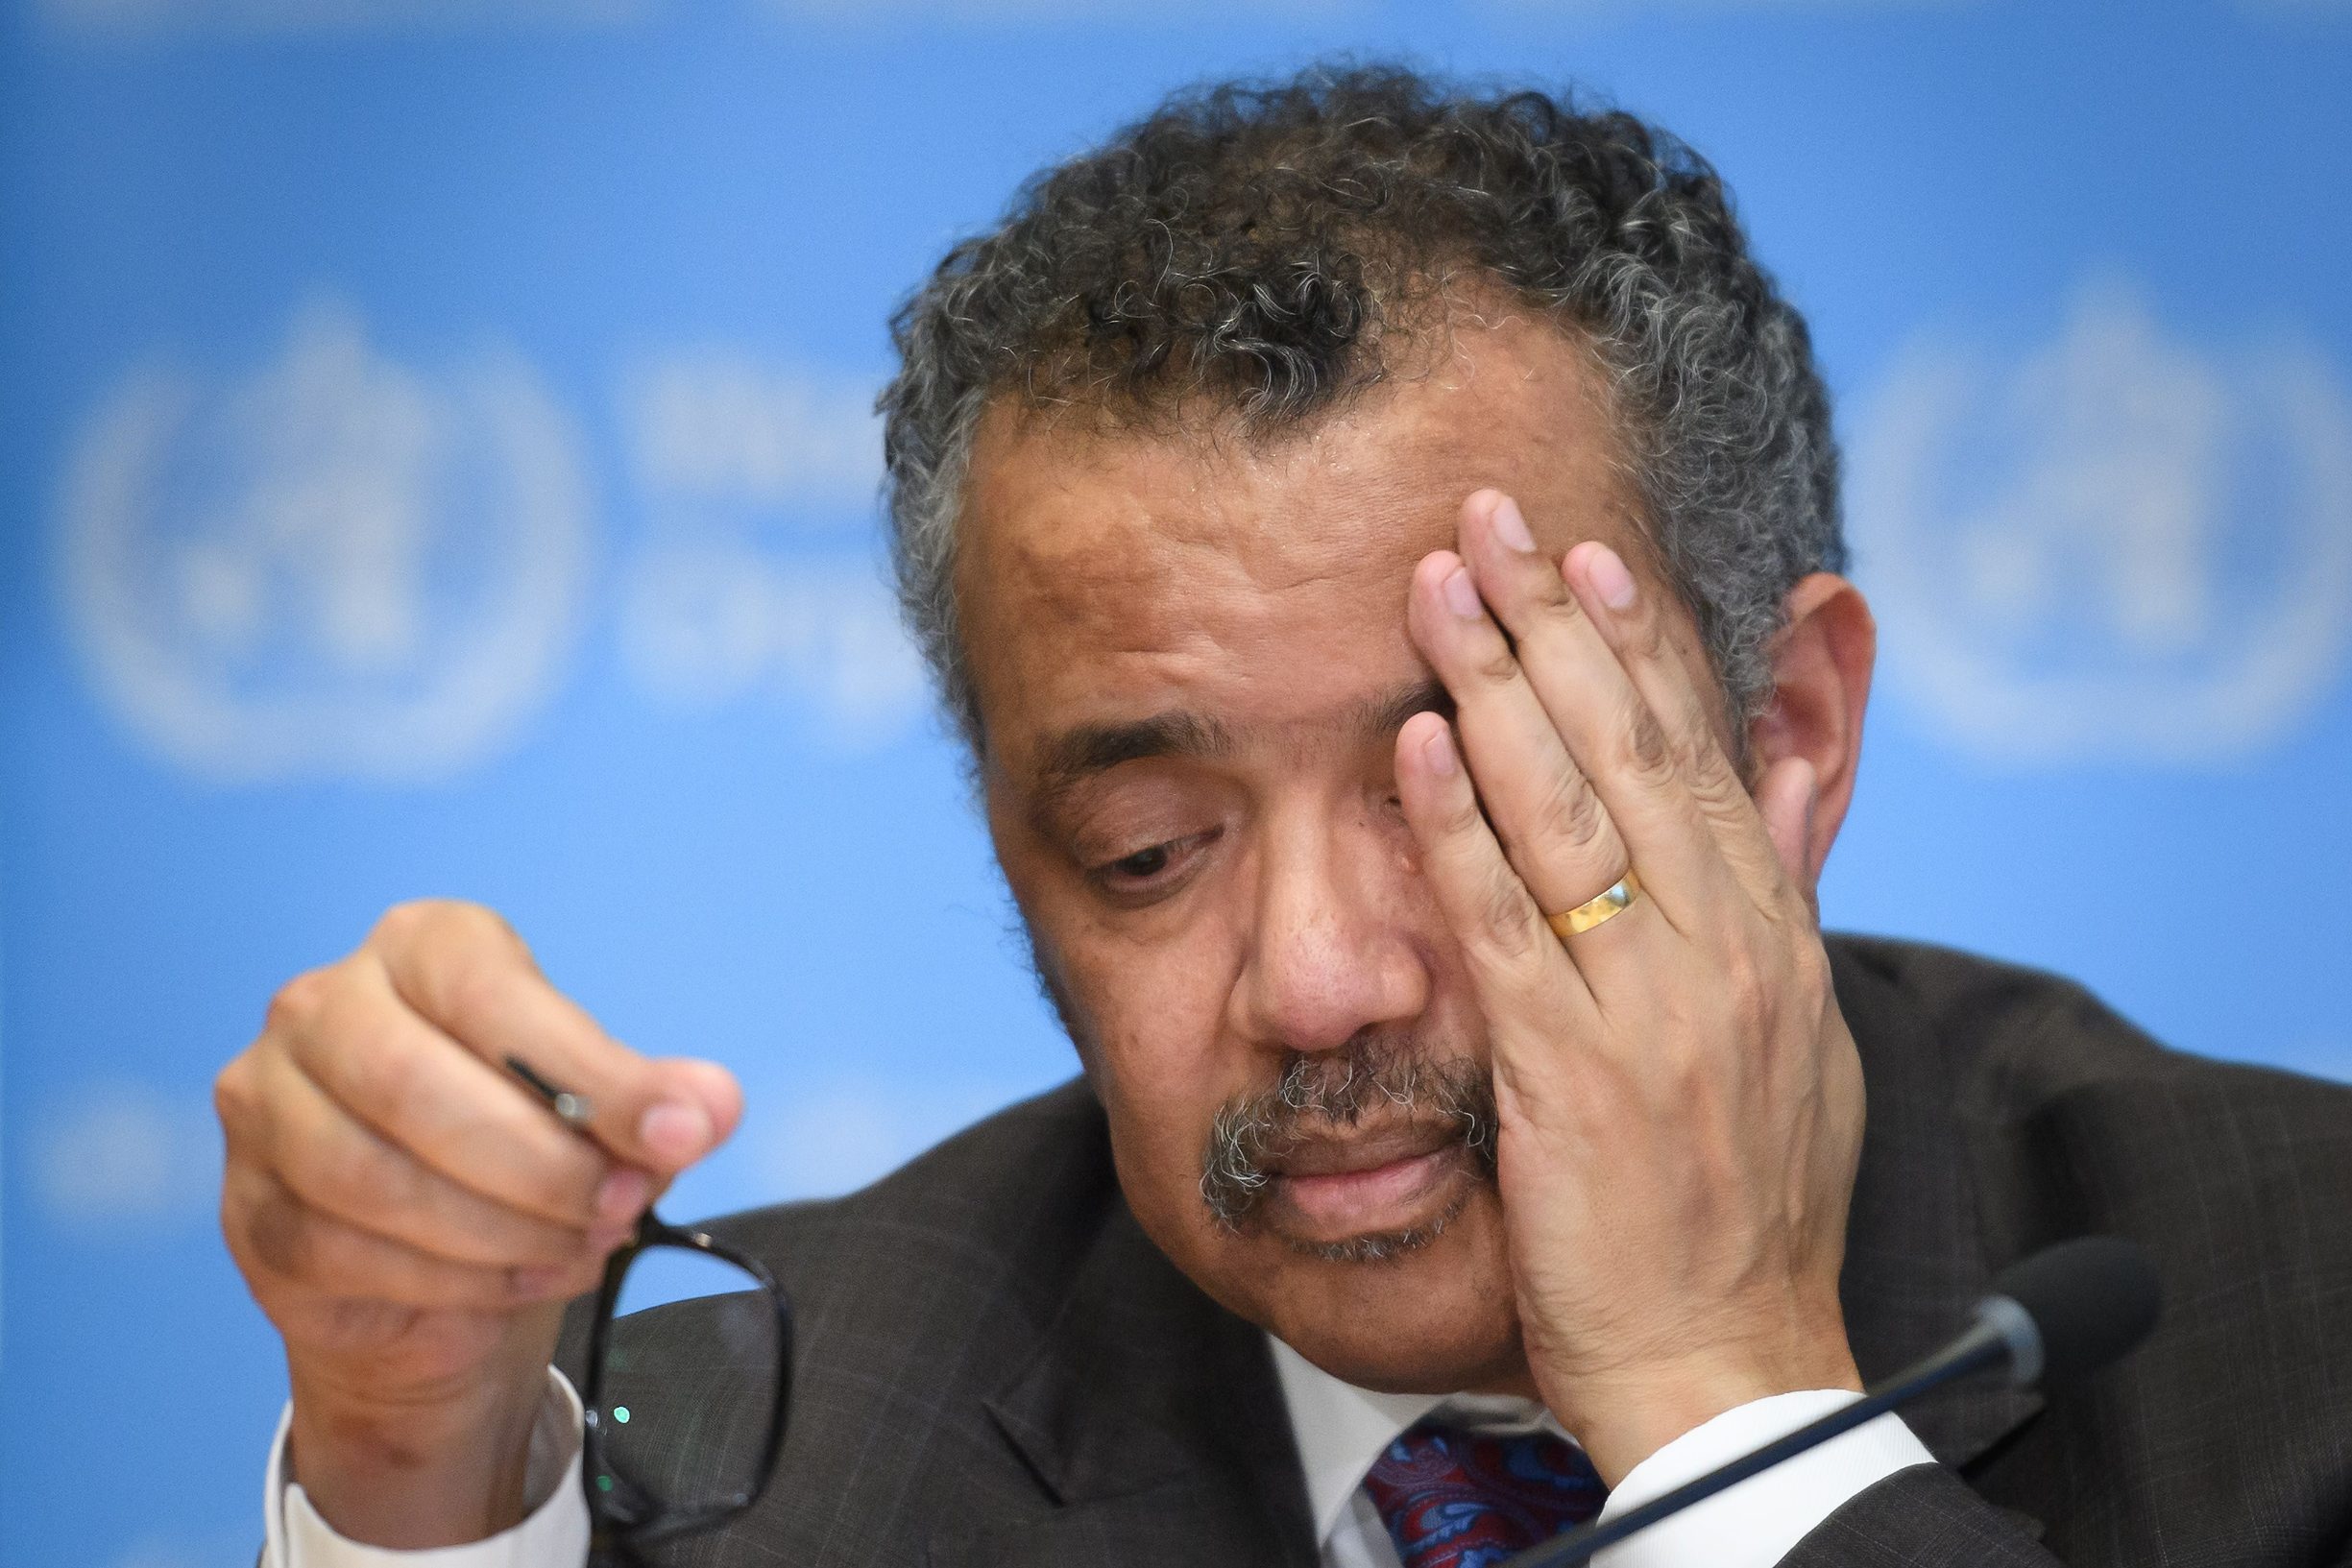 (FILES) In this file photo taken on February 28, 2020, World Health Organization (WHO) Director-General Tedros Adhanom Ghebreyesus attends a daily press briefing on COVID-19, the novel coronavirus, at the WHO headquaters in Geneva. - US President Donald Trump announced on April 14, 2020, a suspension of US funding to the World Health Organization because he said it had covered up the seriousness of the COVID-19 outbreak in China before it spread around the world. Trump told a press conference he was instructing his administration to halt funding while 